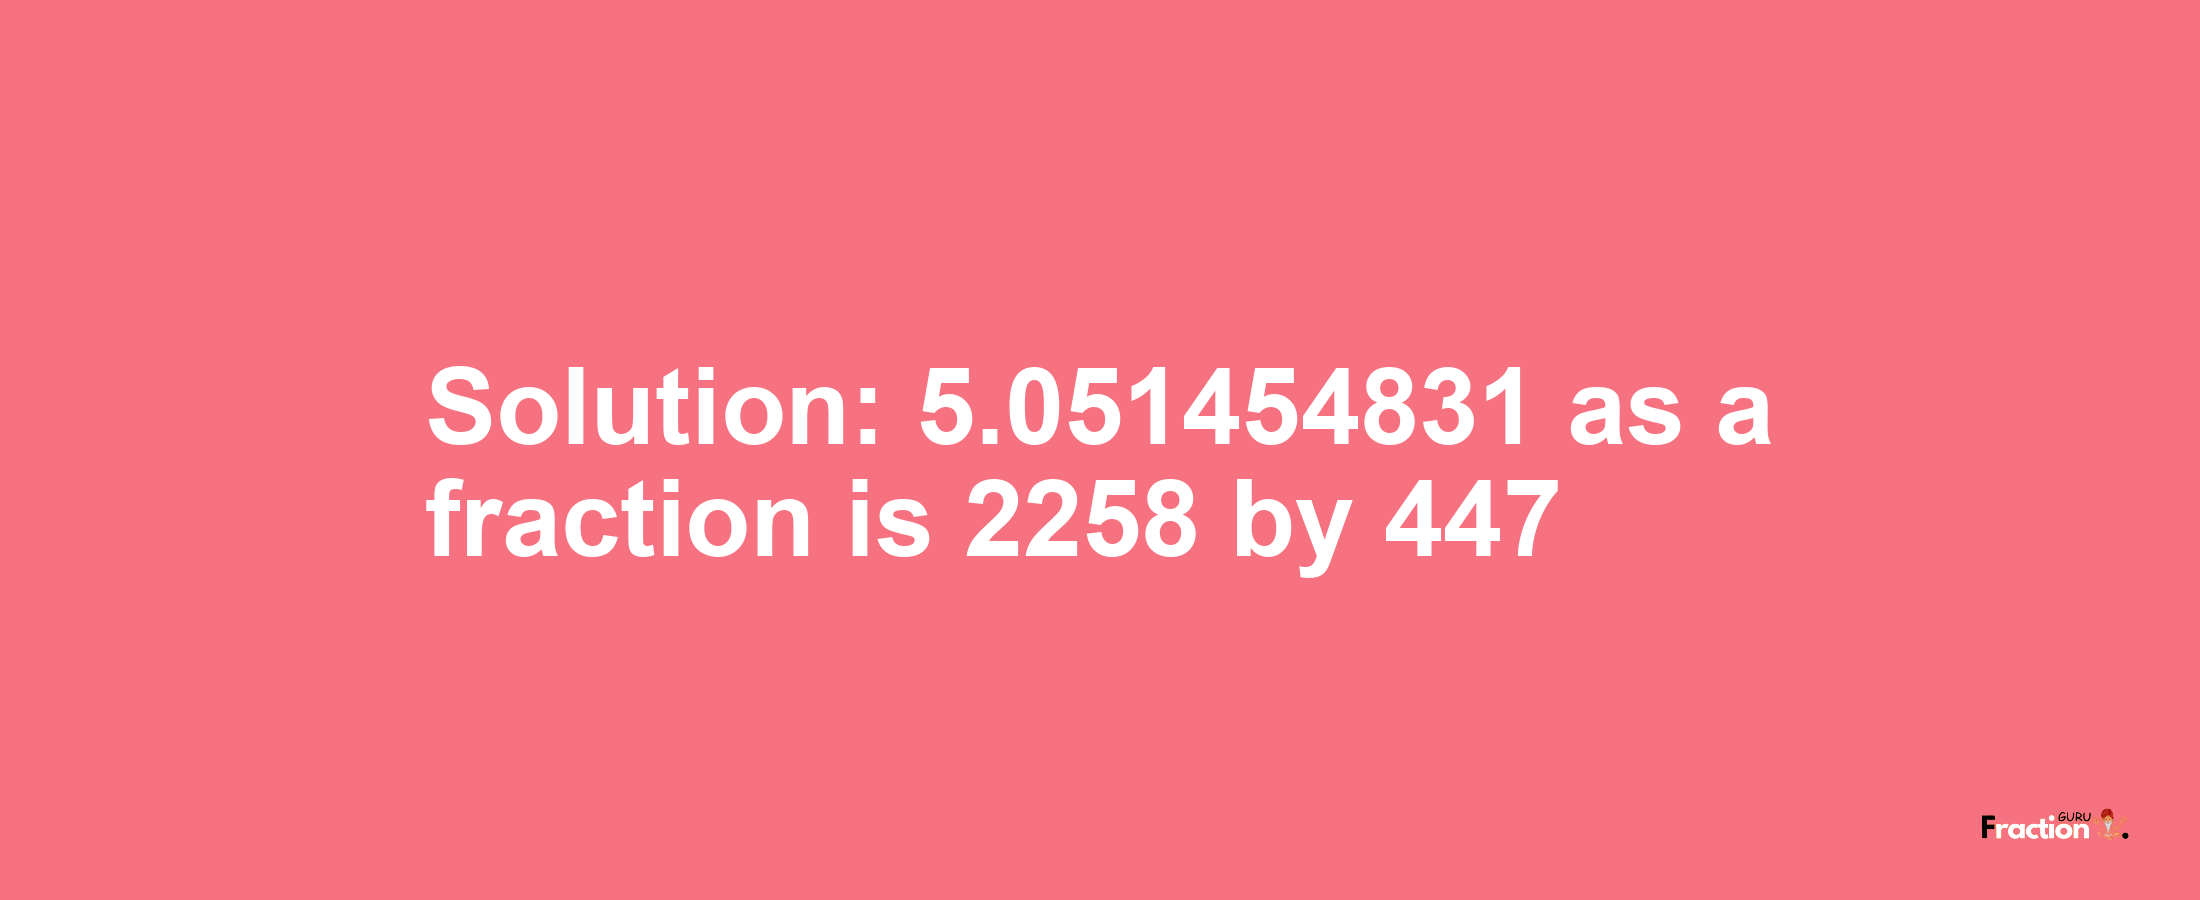 Solution:5.051454831 as a fraction is 2258/447